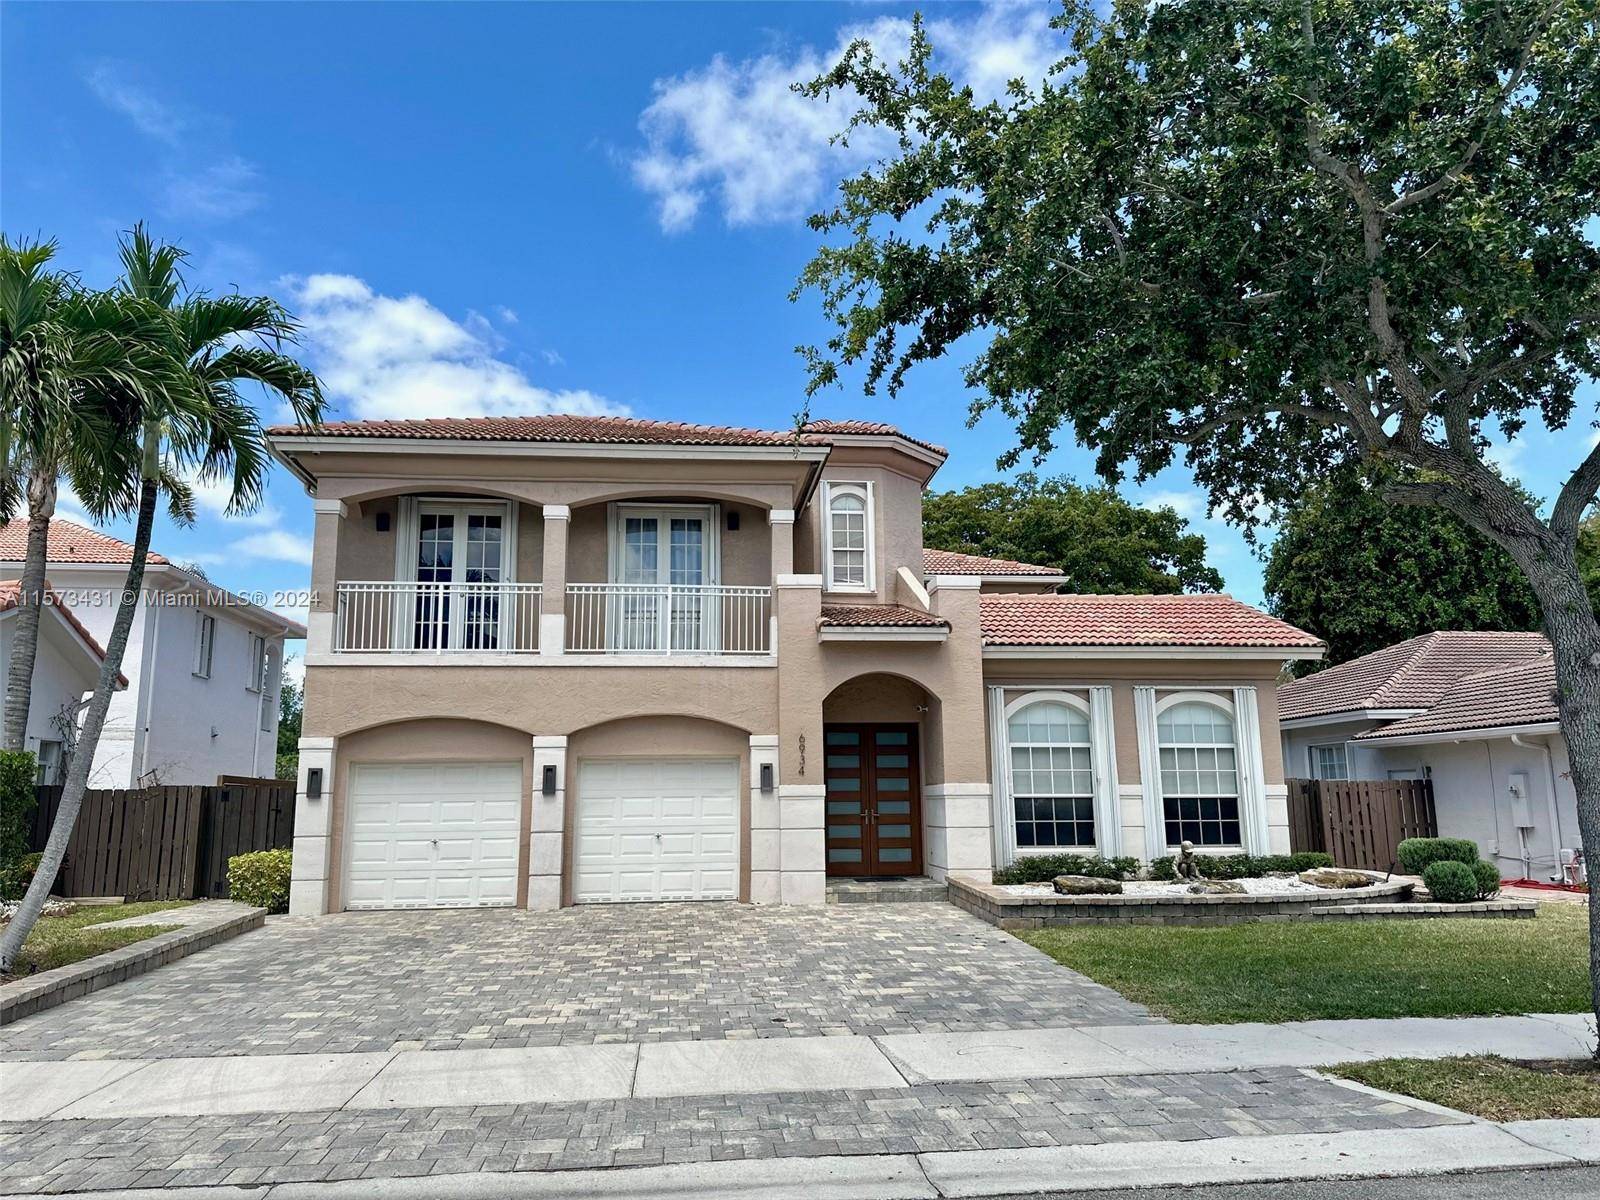 Introducing a beautiful two story single family home located in a prestigious area at Doral, recently renovated with state of the art appliances, high end finishes and seamless blend of ...